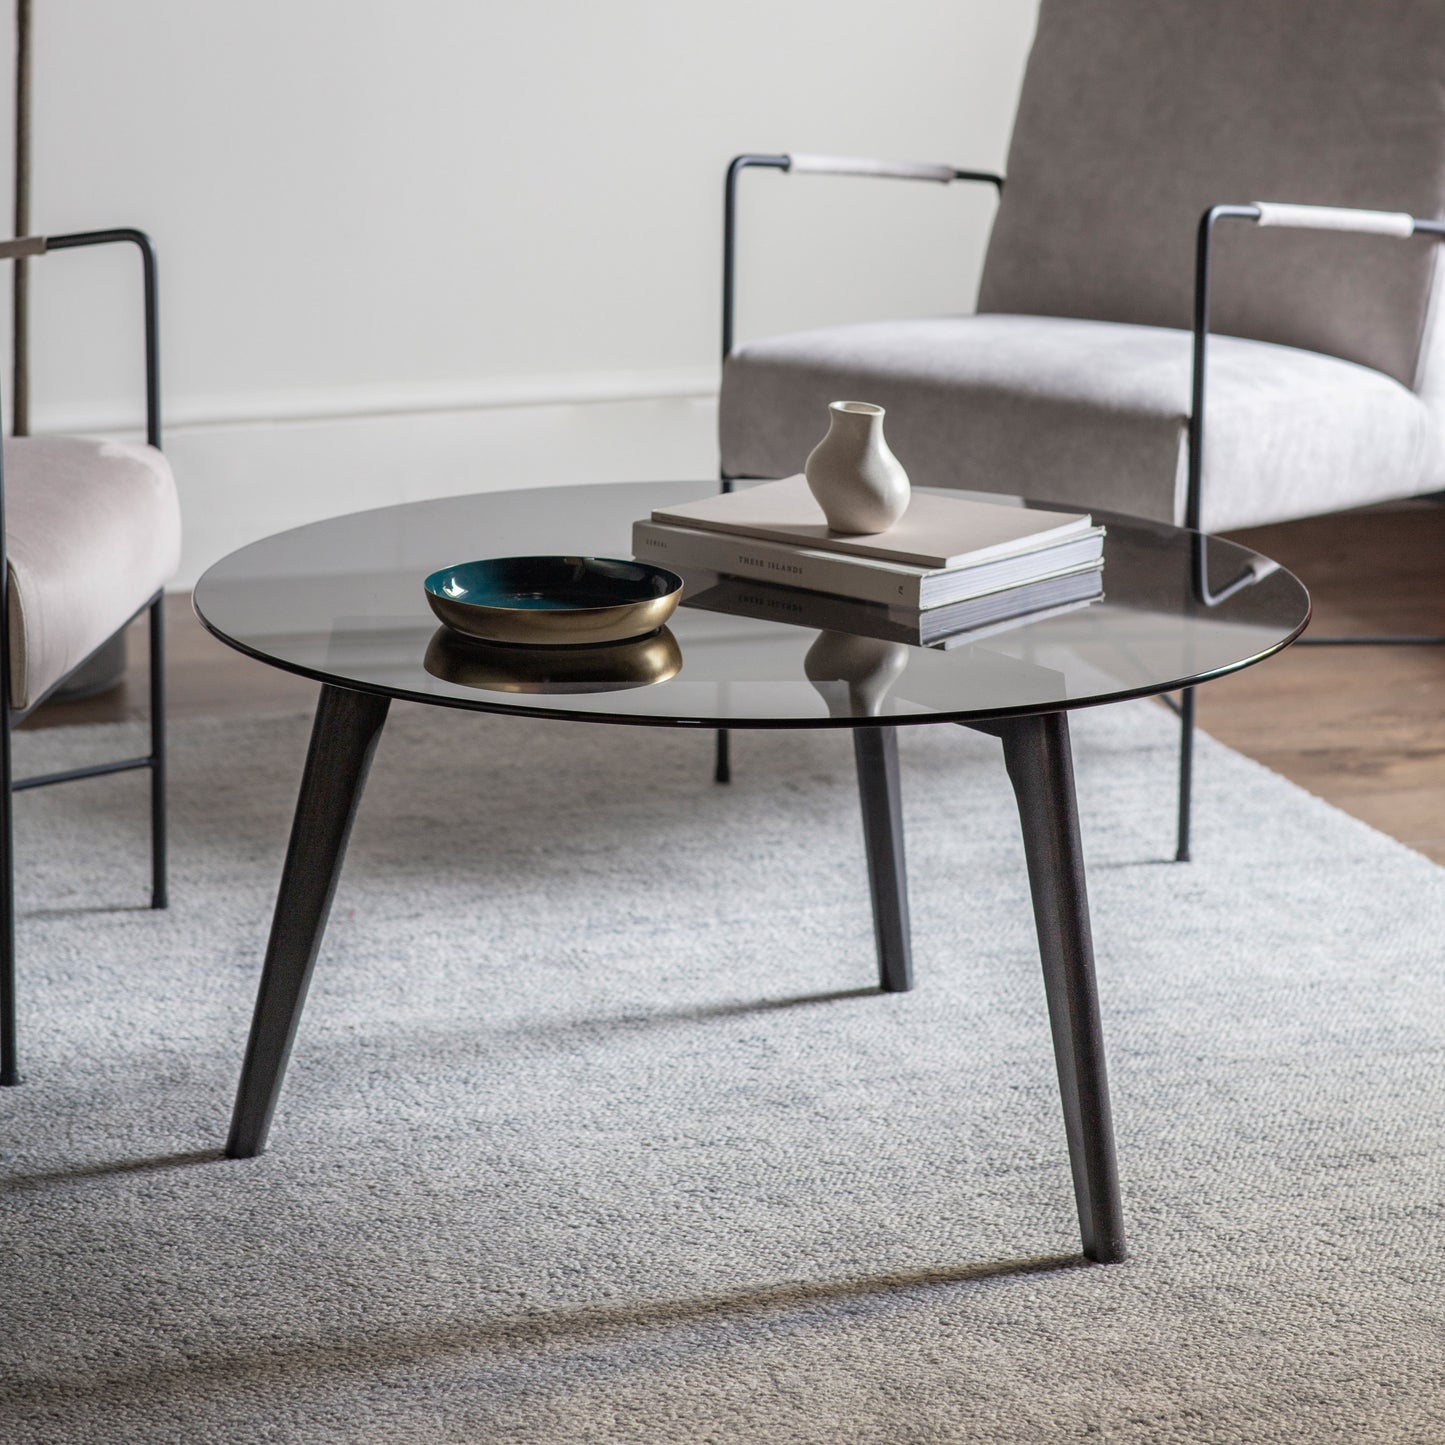 A black Ashprington Round Coffee Table in a living room, adding to the interior decor of the home.
